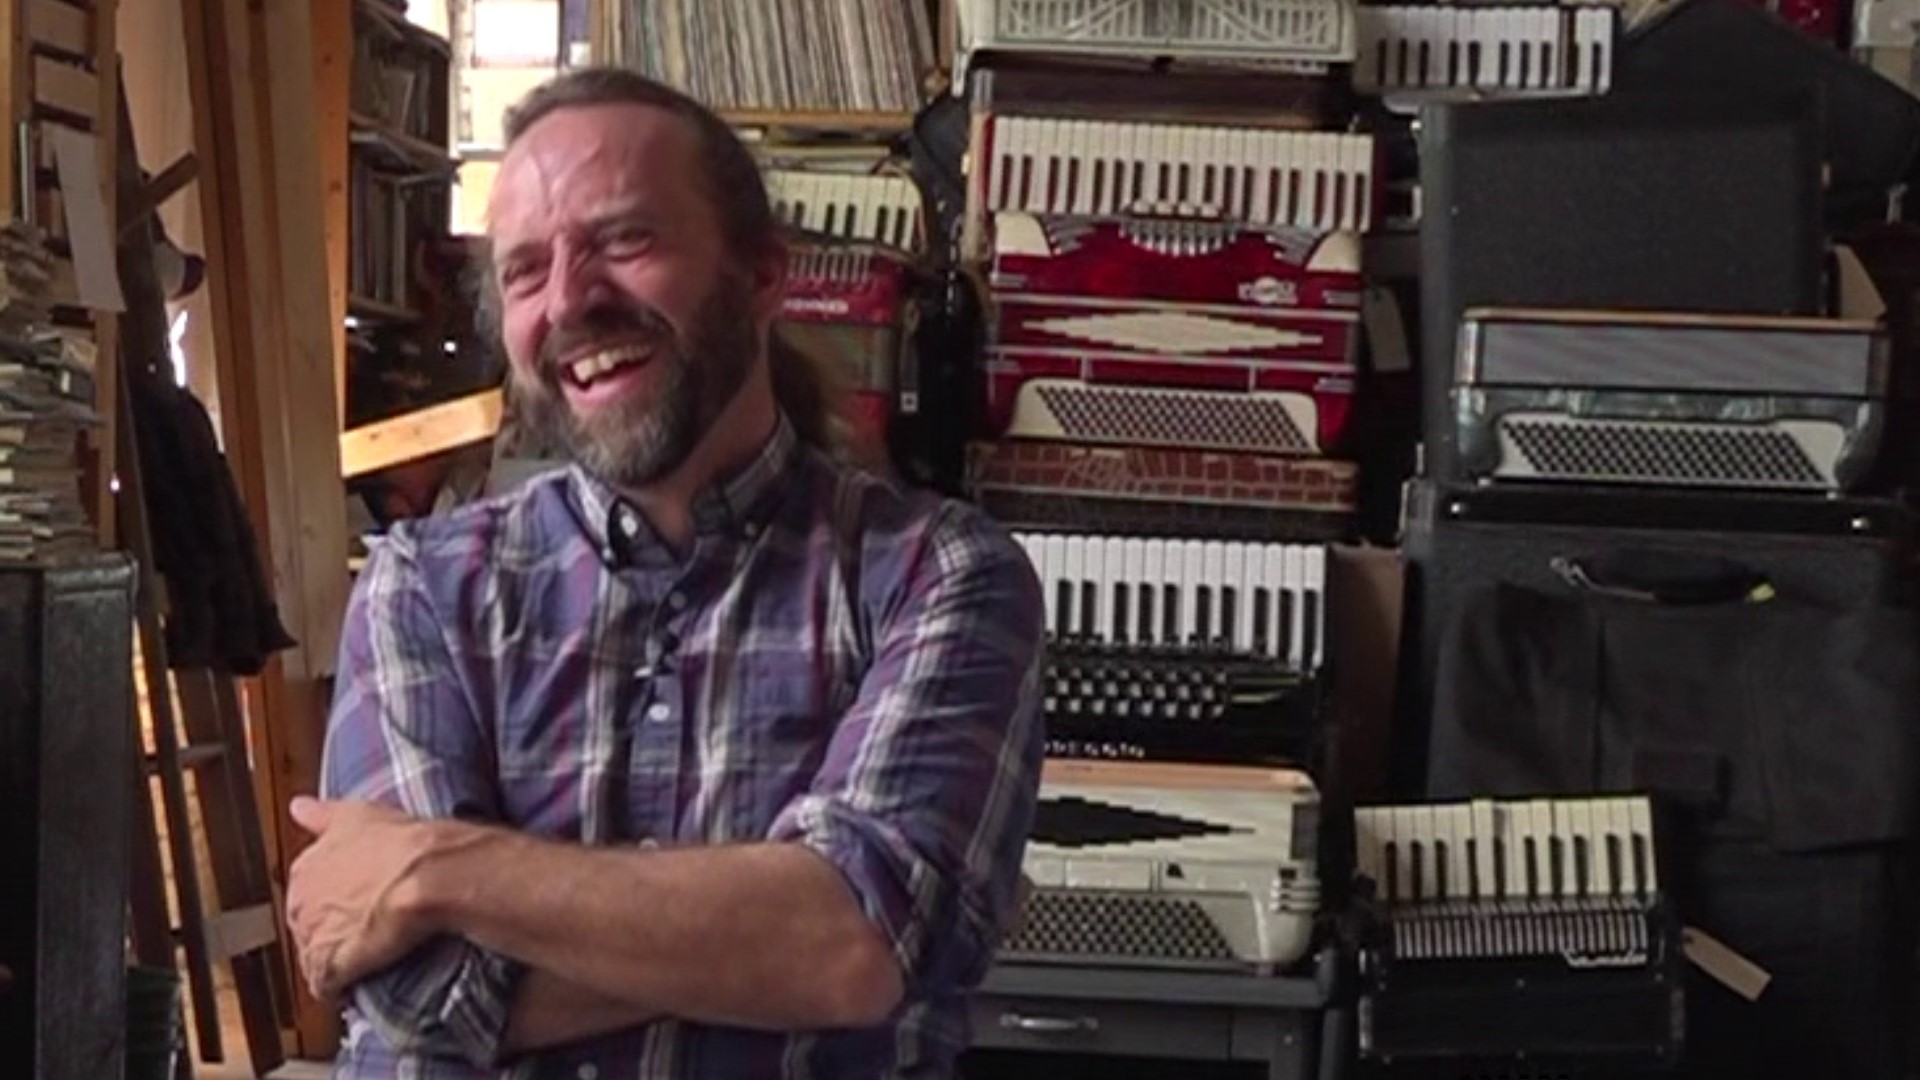 The artist, musician and entrepreneur has owned Dan Turpening’s Accordion Shoppe in northeast Minneapolis’ Thorp Building since 1999.